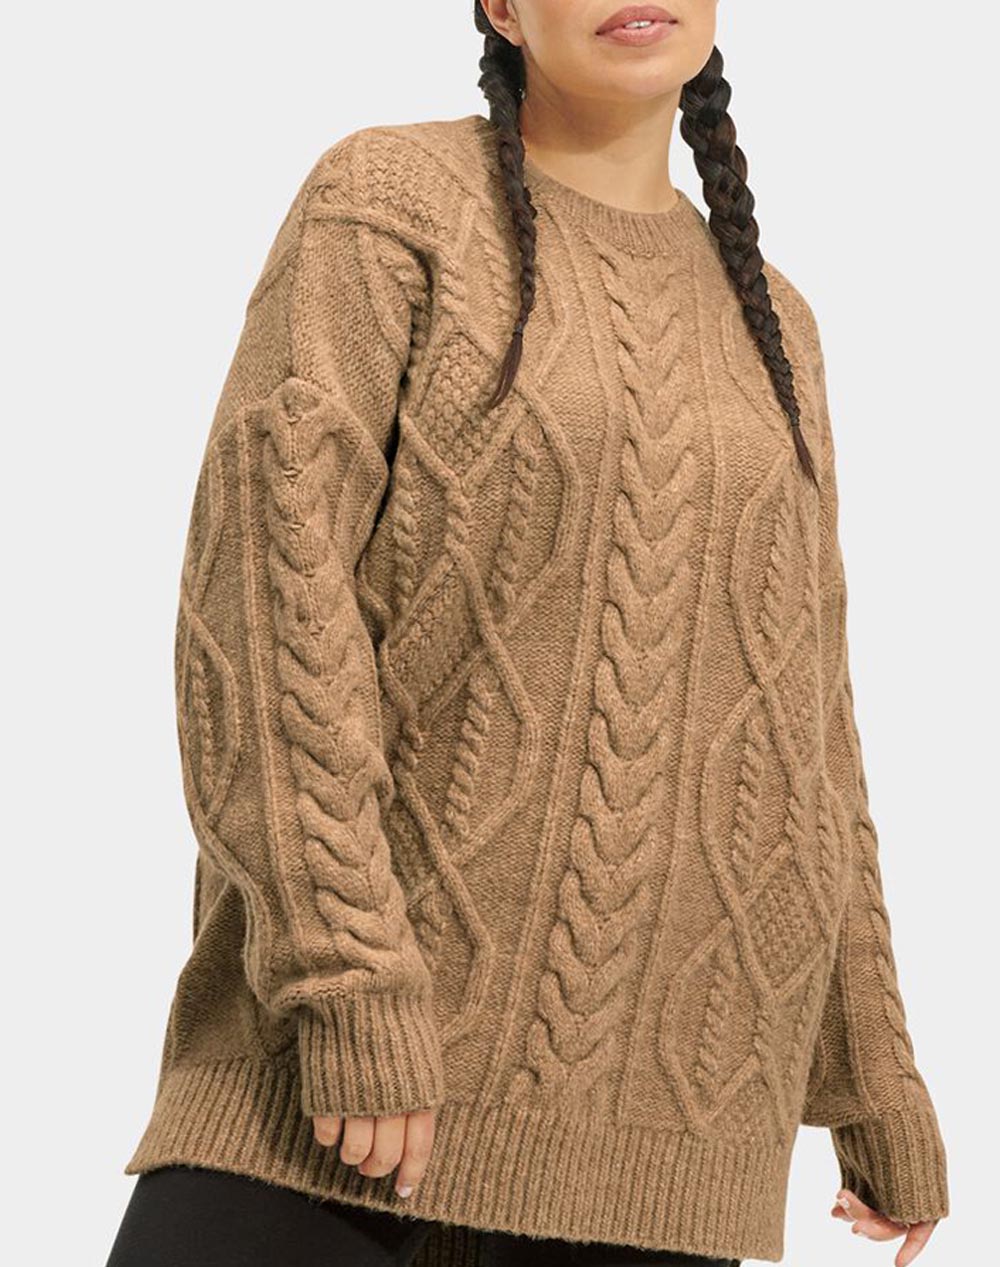 UGG Raelee Cable Knit Sweater Long 1133131-00K4 Camel